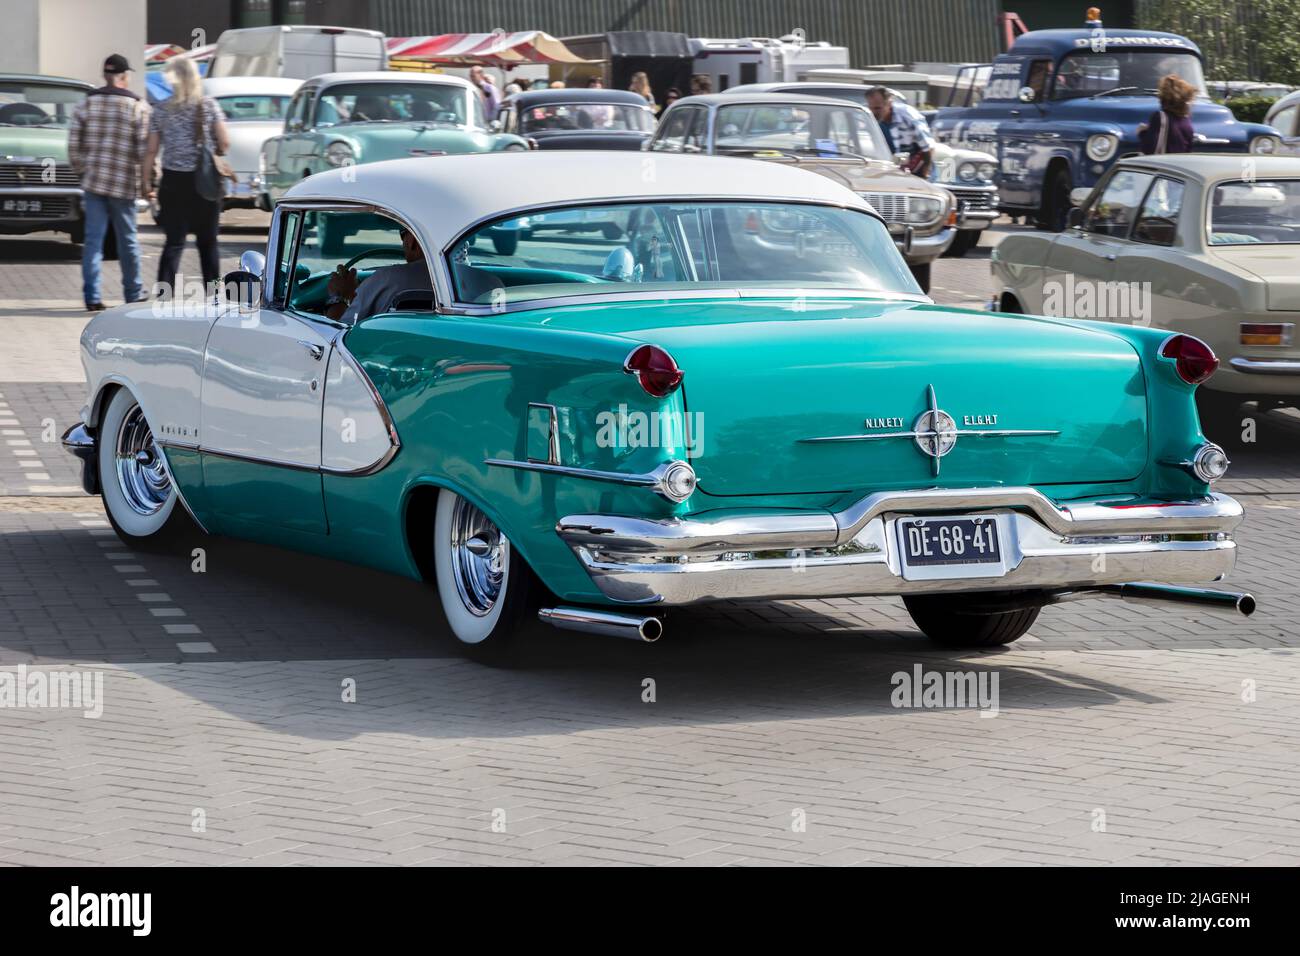 1956 Oldsmobile 98 DHC Holiday Coupé classic car at Rosmalen, The Netherlands - May 10, 2015 Stock Photo